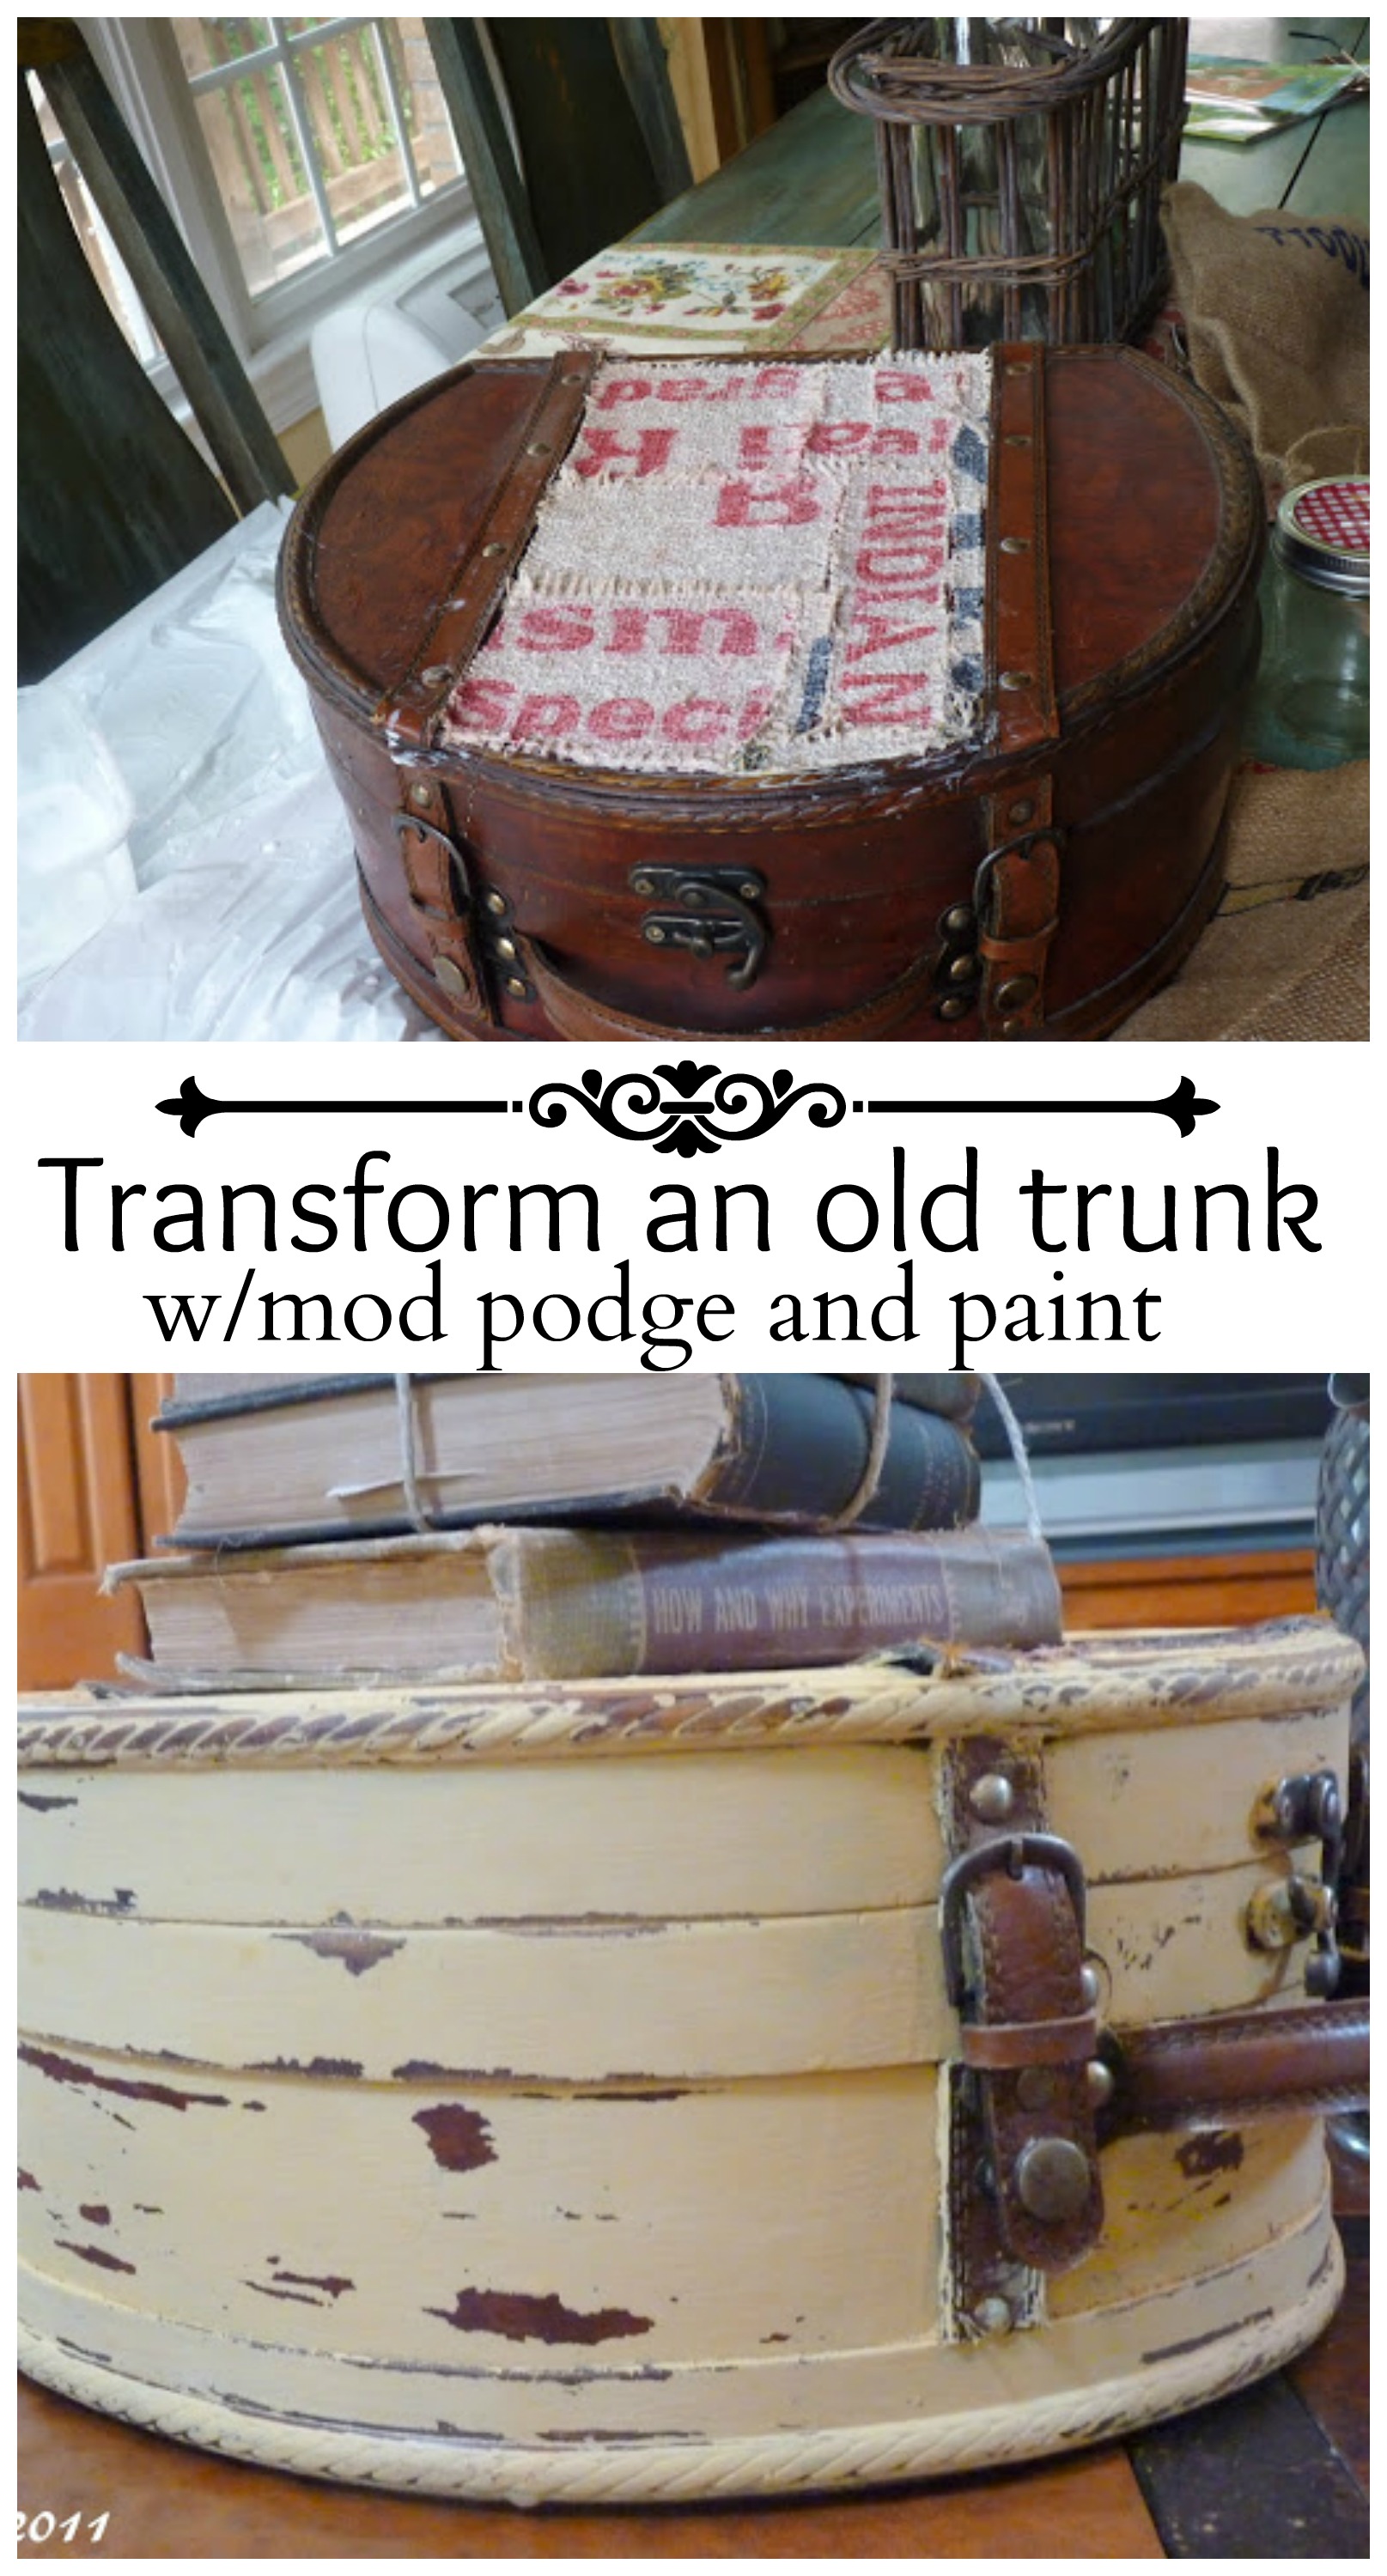 transform an old trunk with mod podge and paint